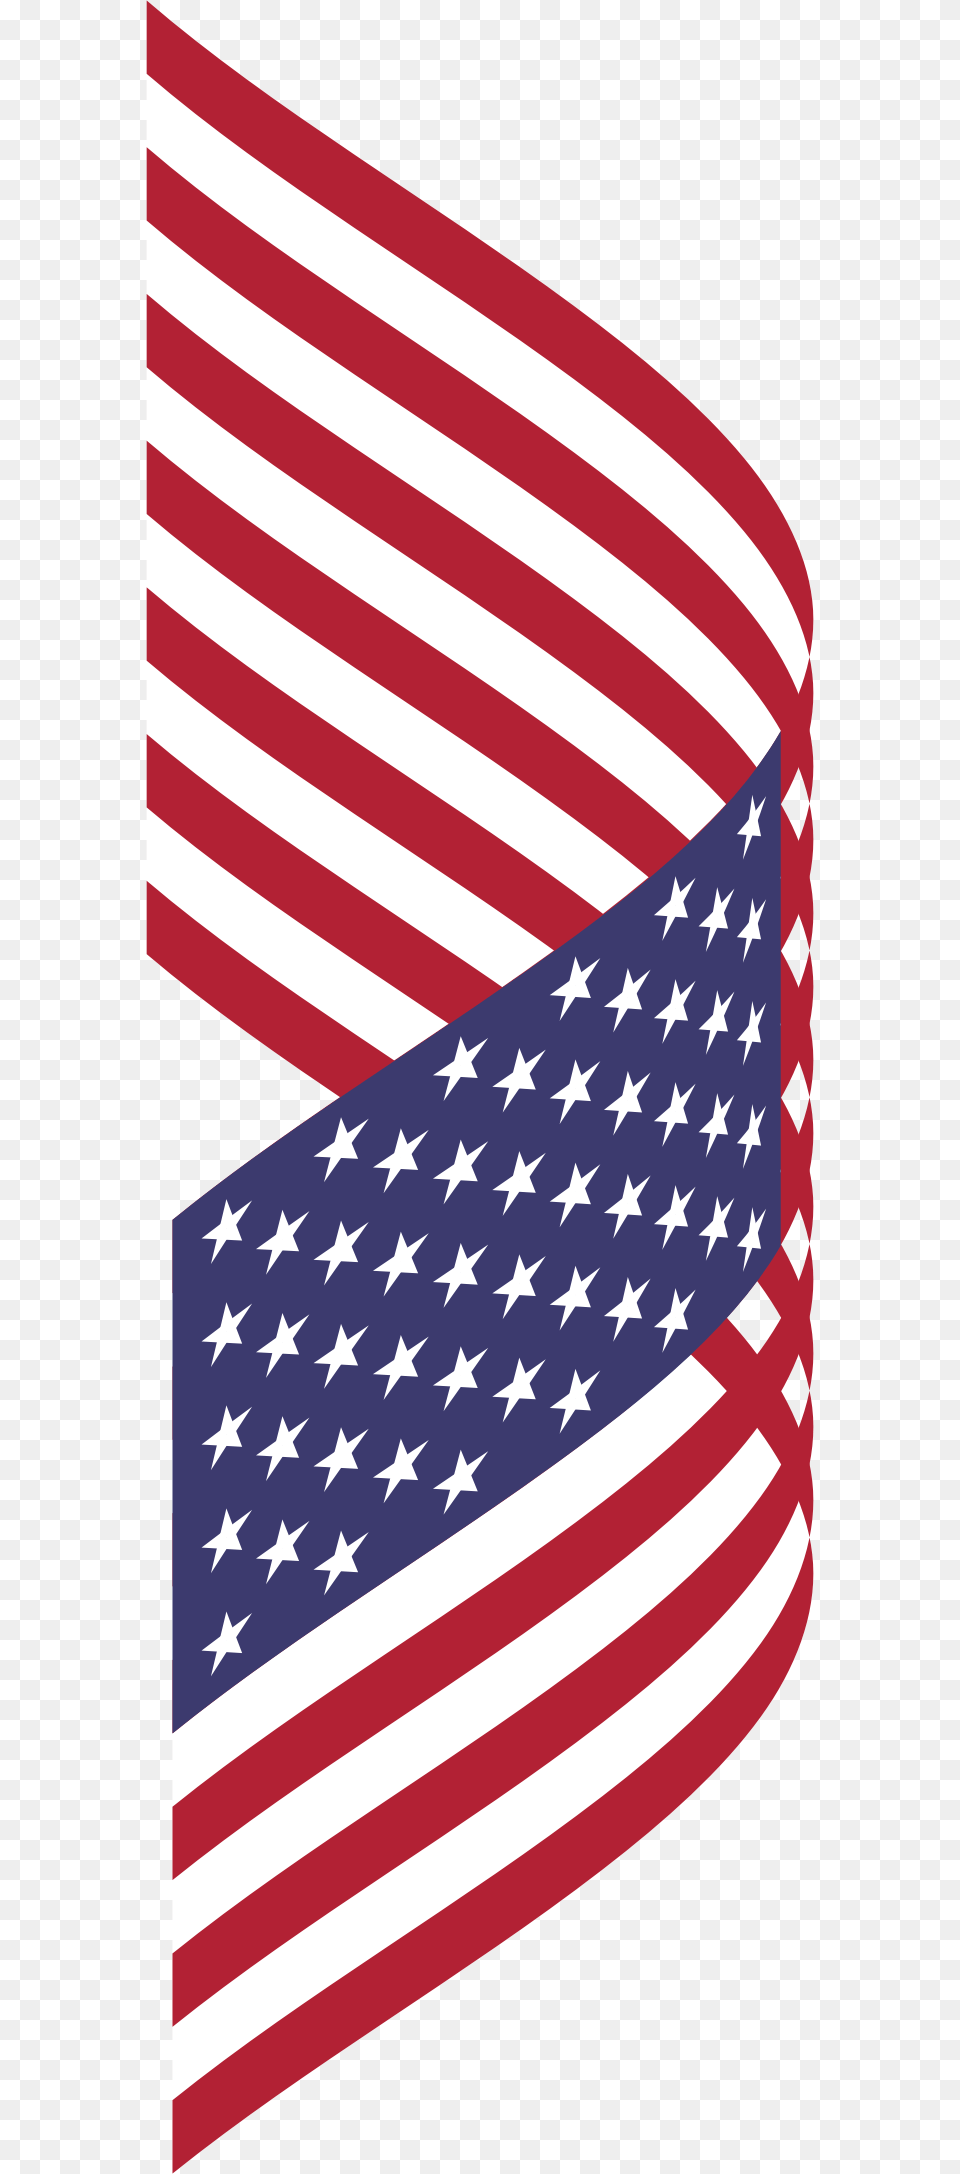 This Icons Design Of American Flag Breezy, American Flag Png Image